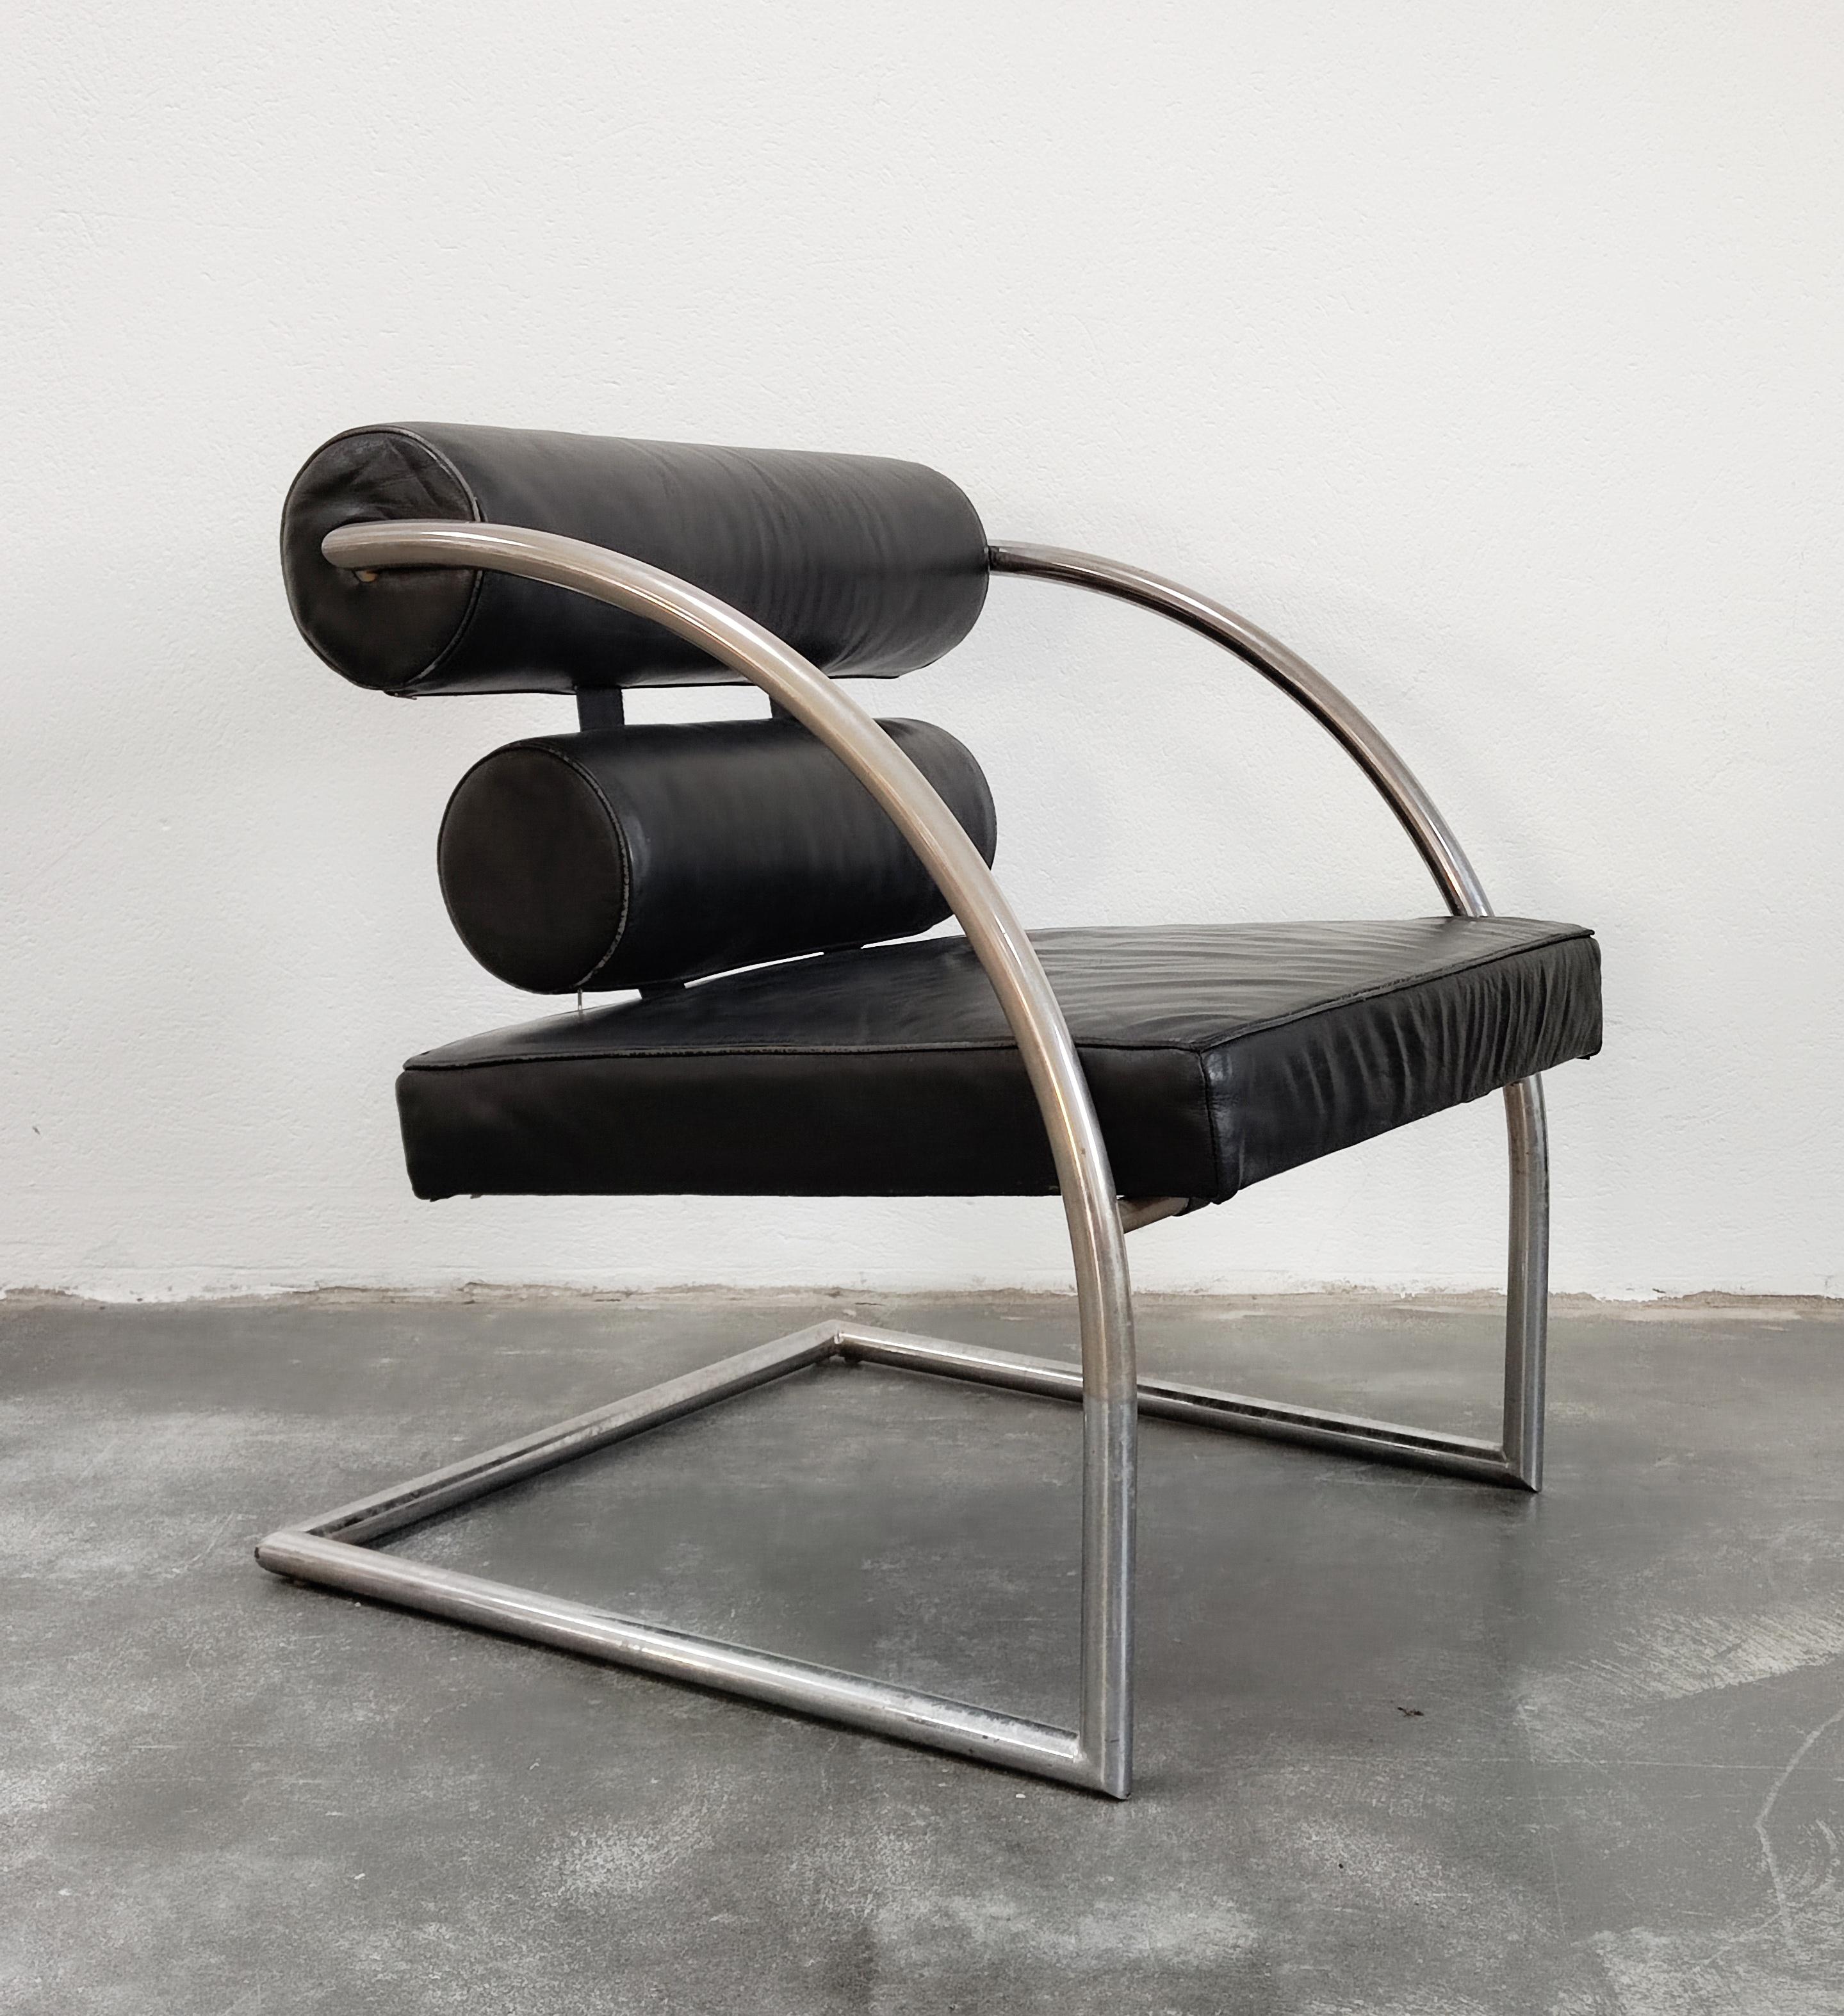 Bauhaus Style Leather Armchair with Chrome Tubular Frame, Switzerland, 1970s For Sale 2